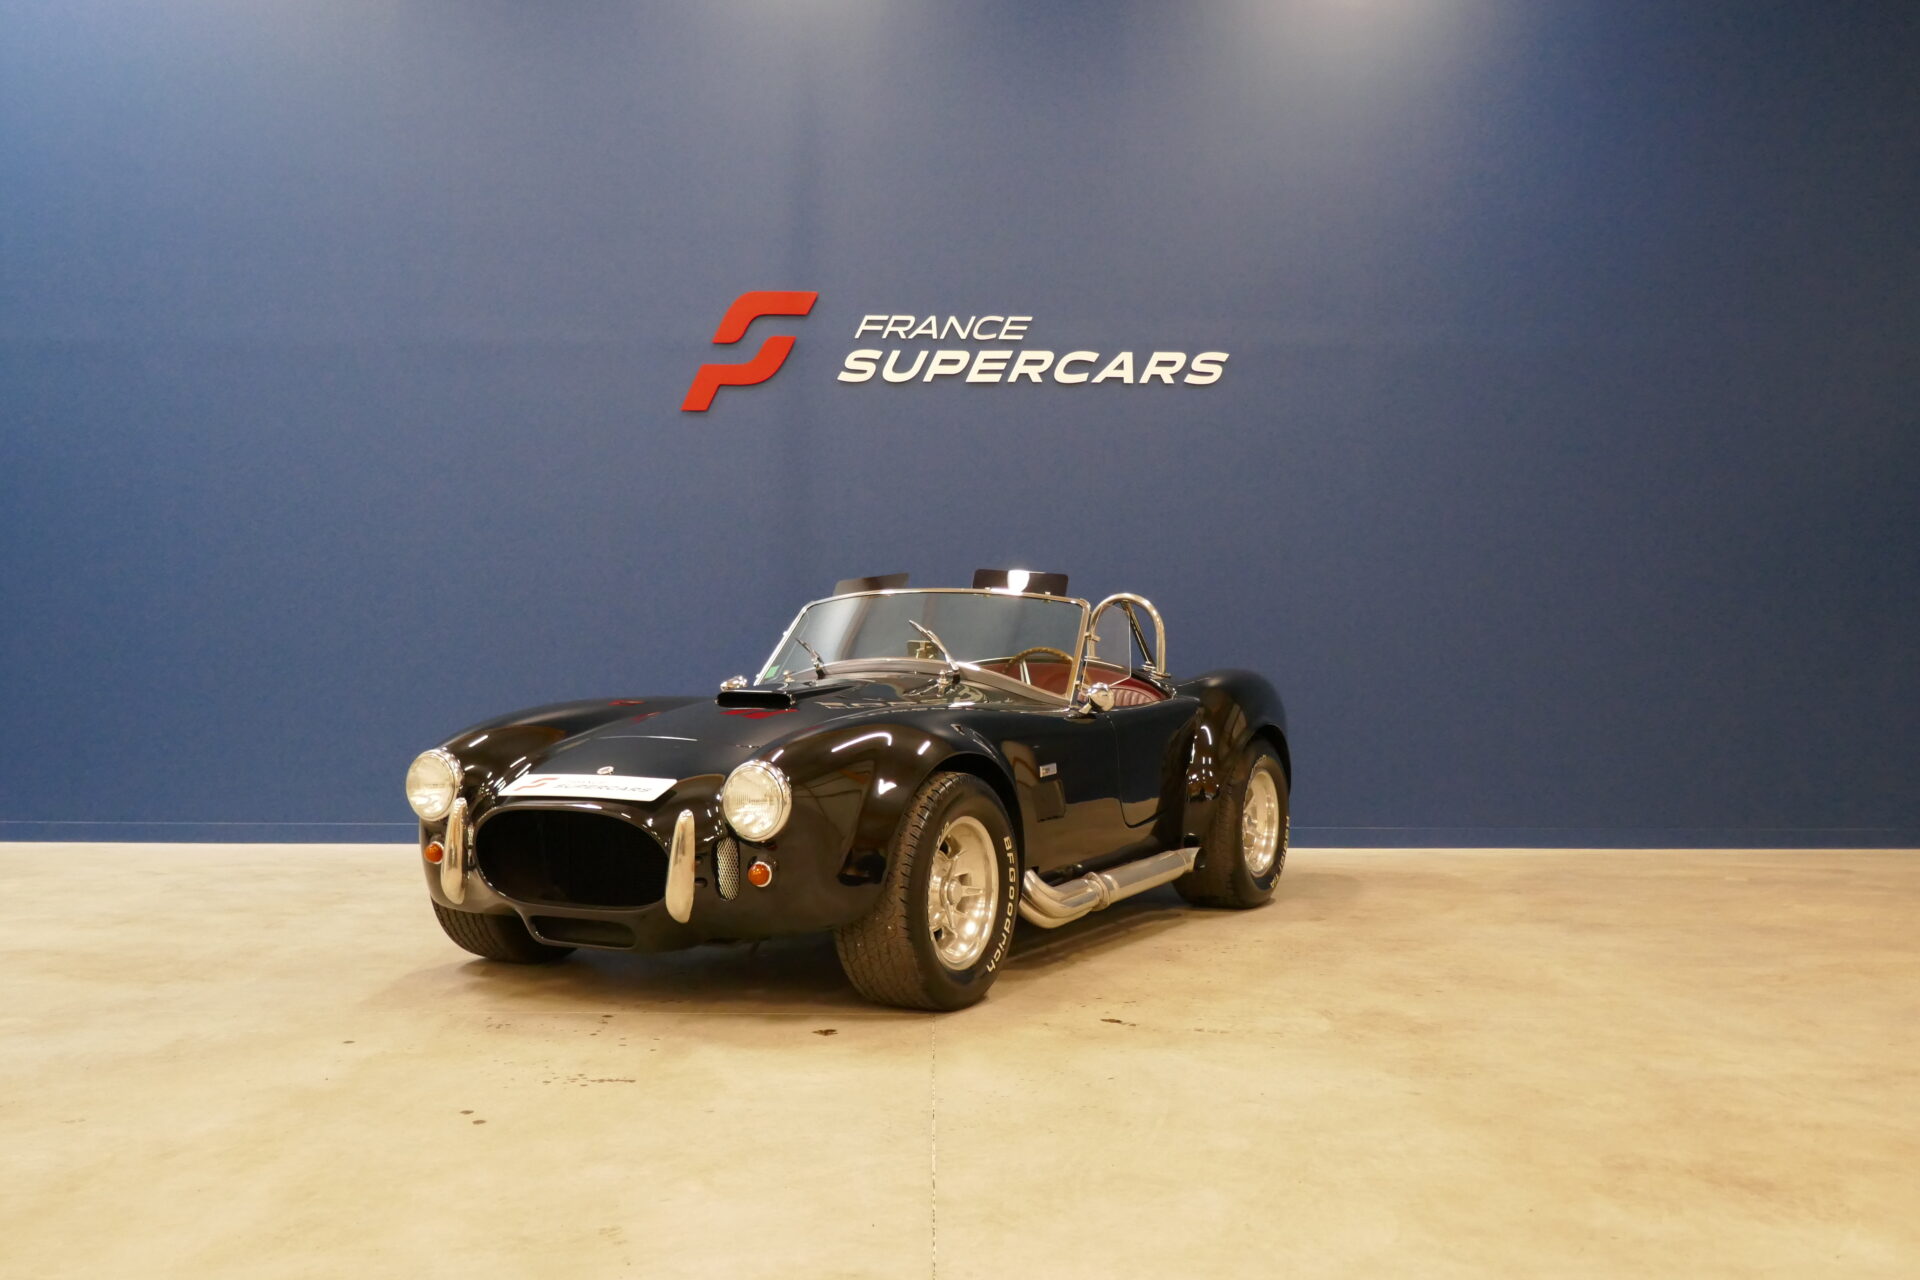 SHELBY COBRA 289 SHELL VALLEY FRANCE SUPERCARS